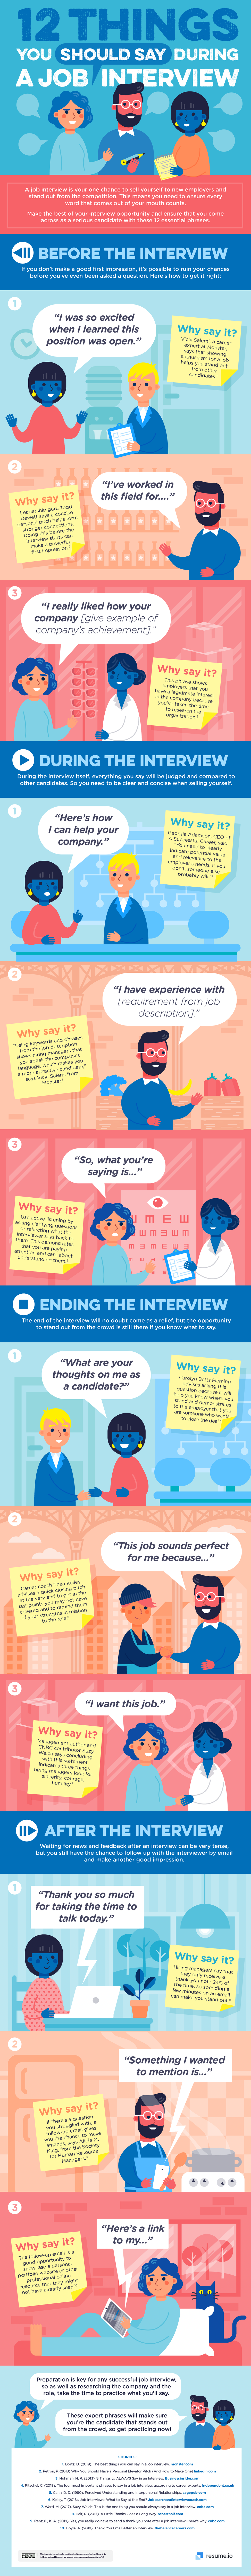 resume.io shares phrases you can say in a job interview